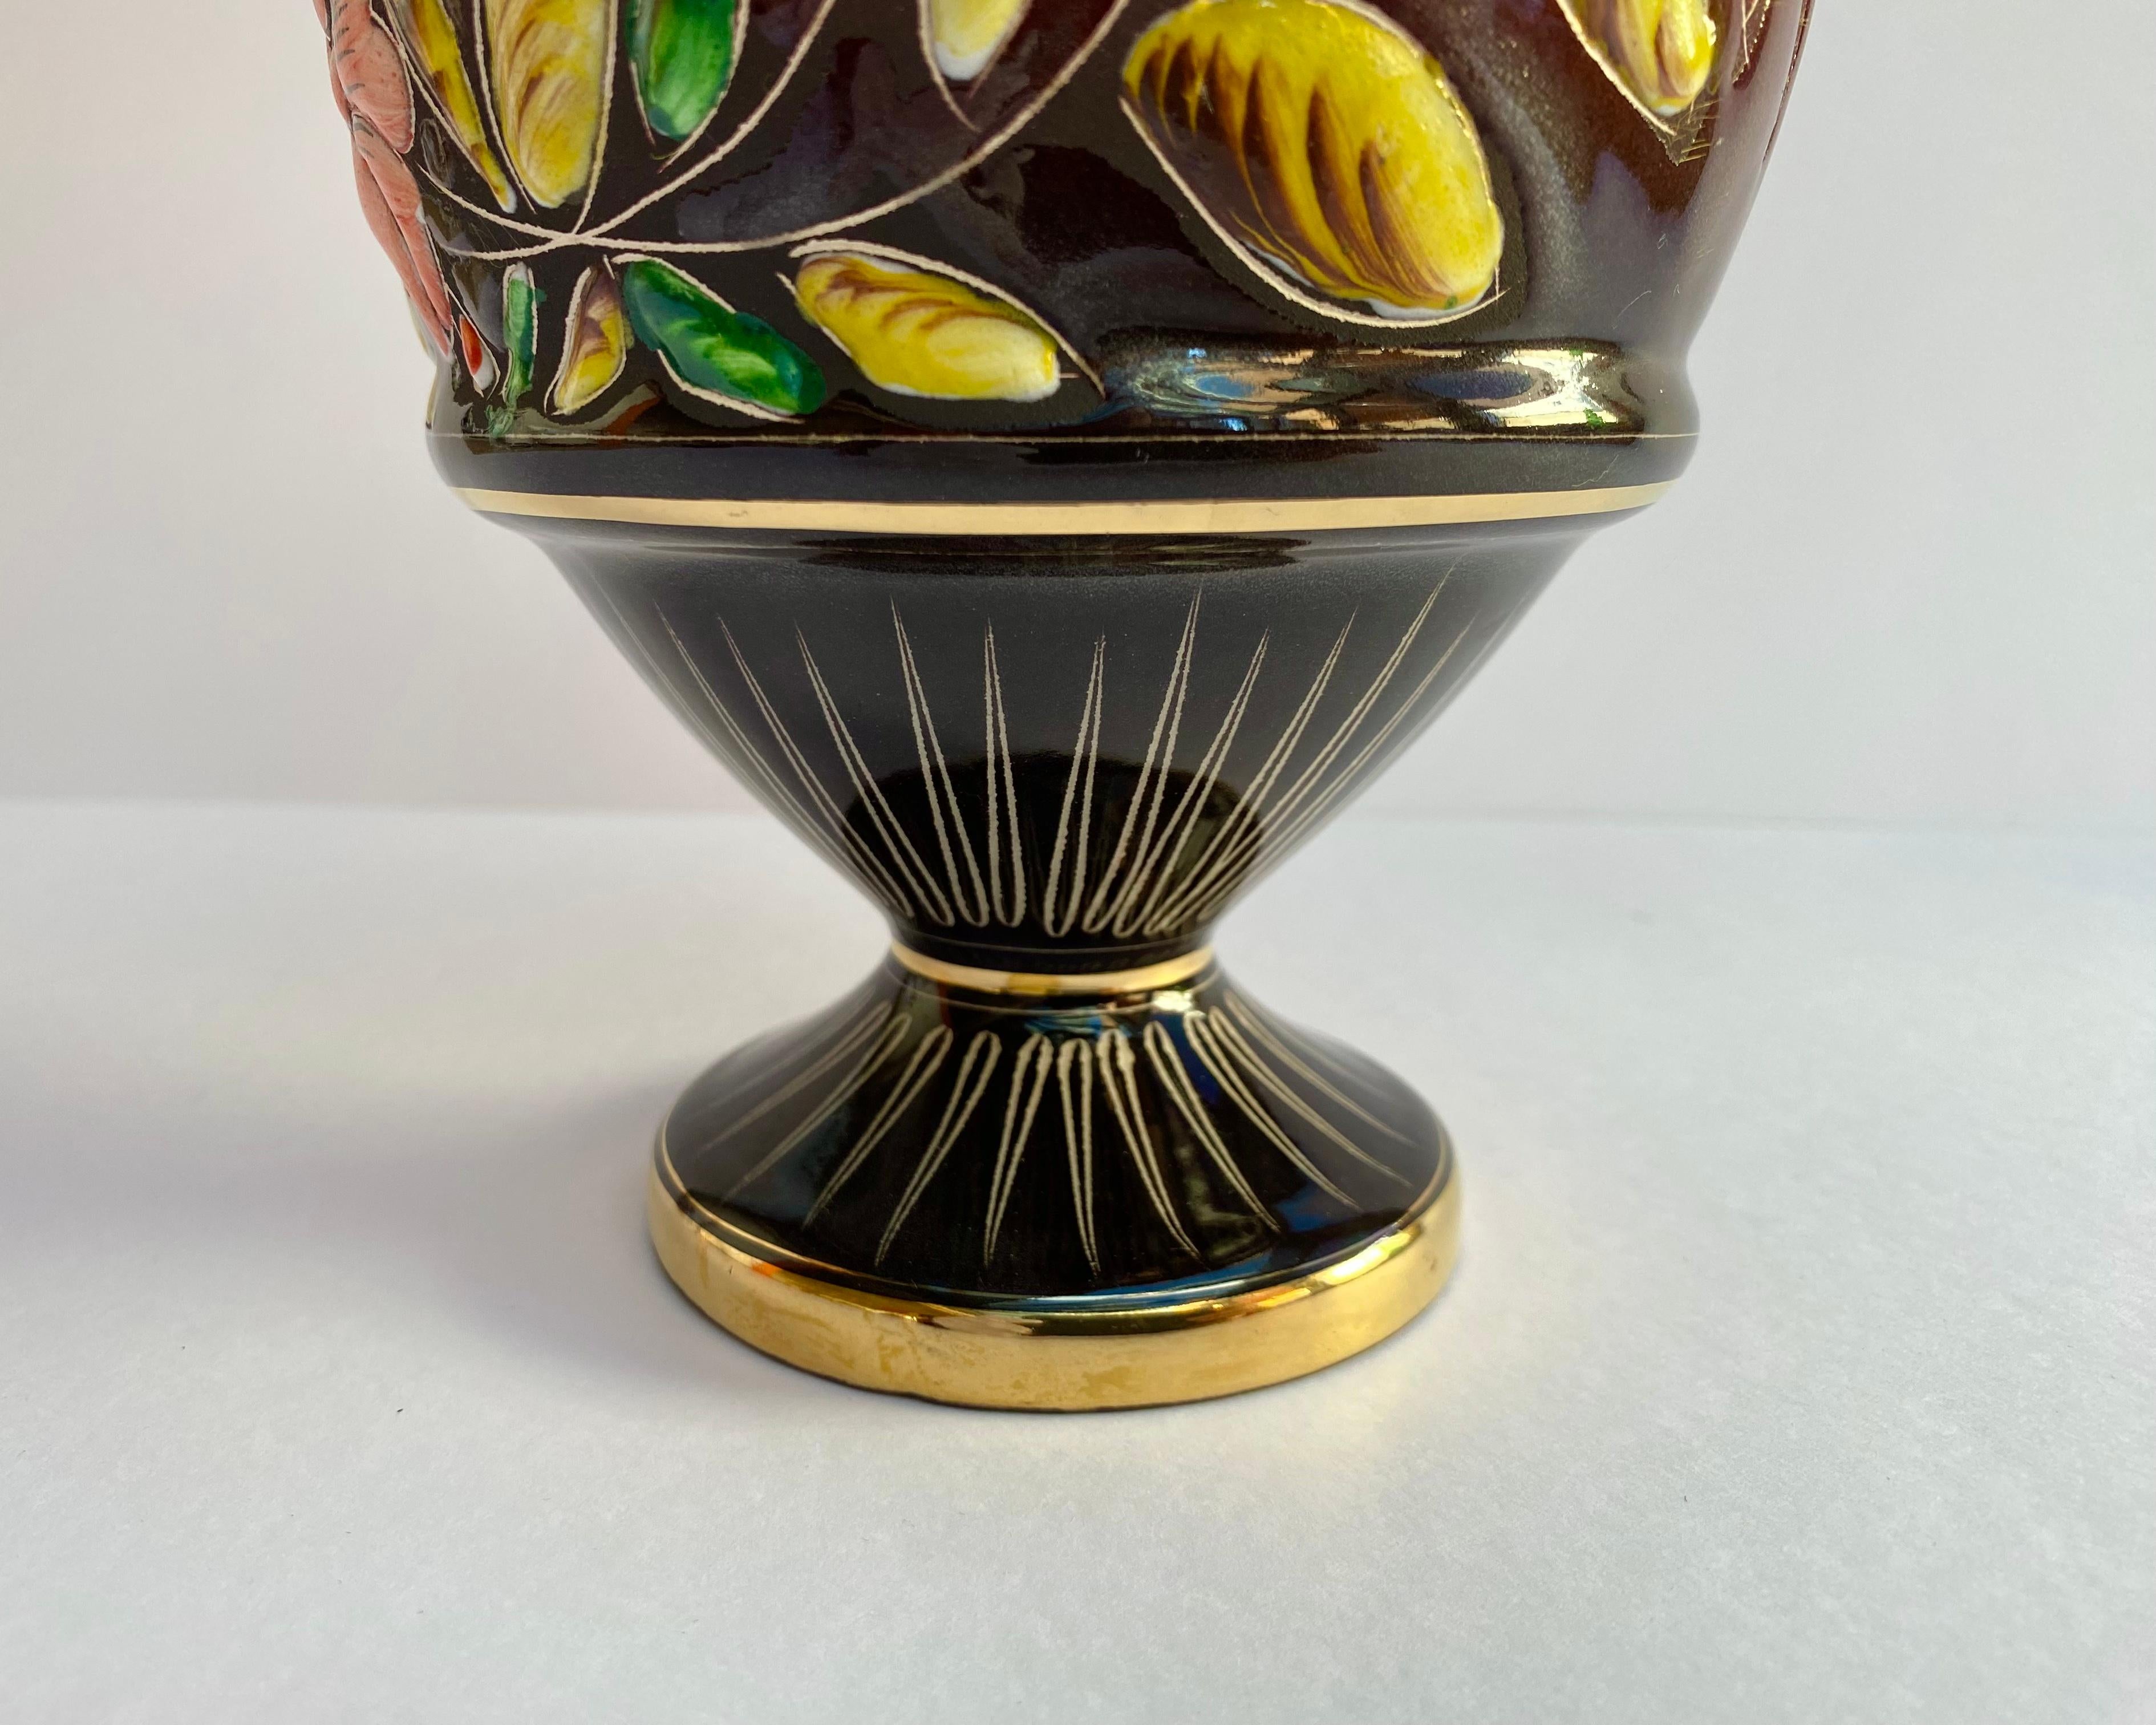 Vase Vintage Floral Decor in Ceramic H.Bequet Belgium 1950s Hand Crafted In Excellent Condition For Sale In Bastogne, BE